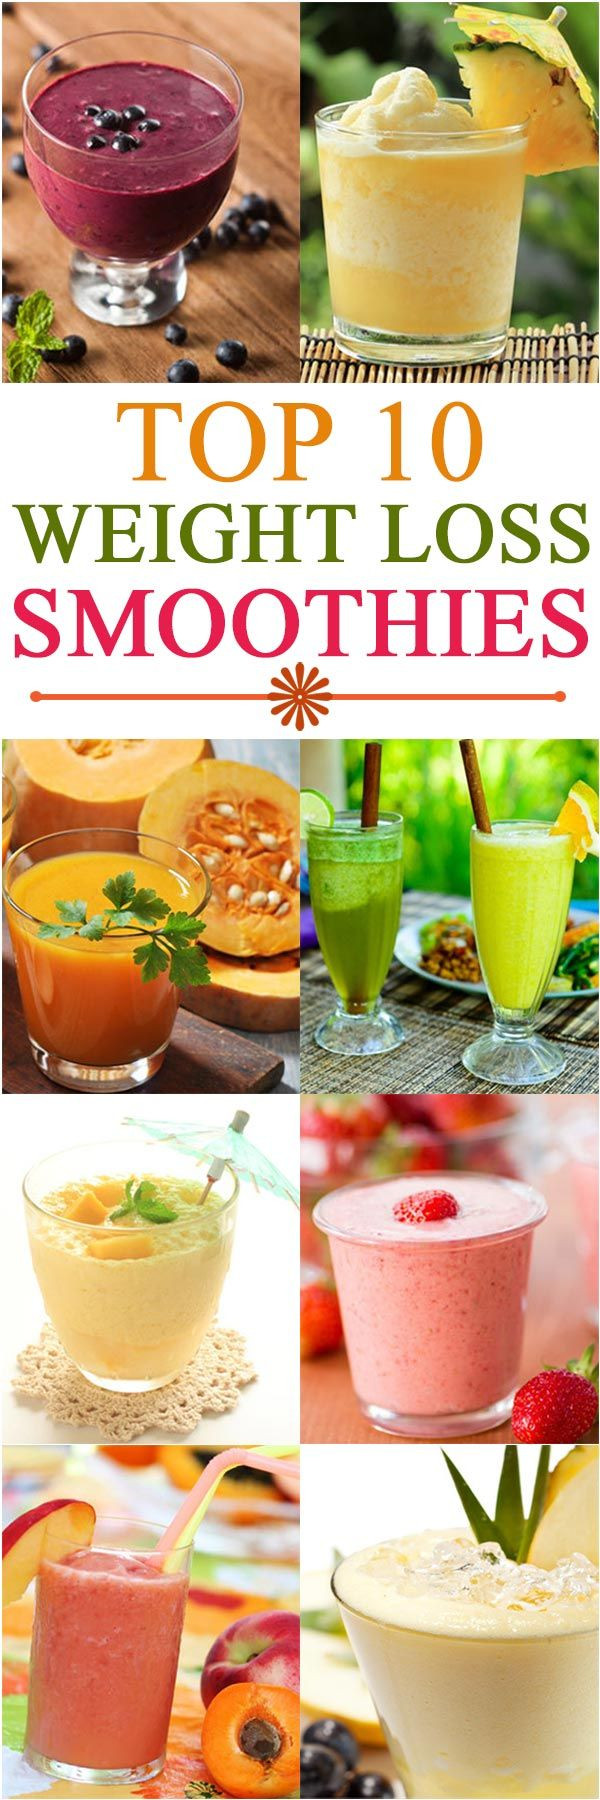 Best Breakfast Smoothies For Weight Loss
 21 Weight Loss Smoothies With Recipes